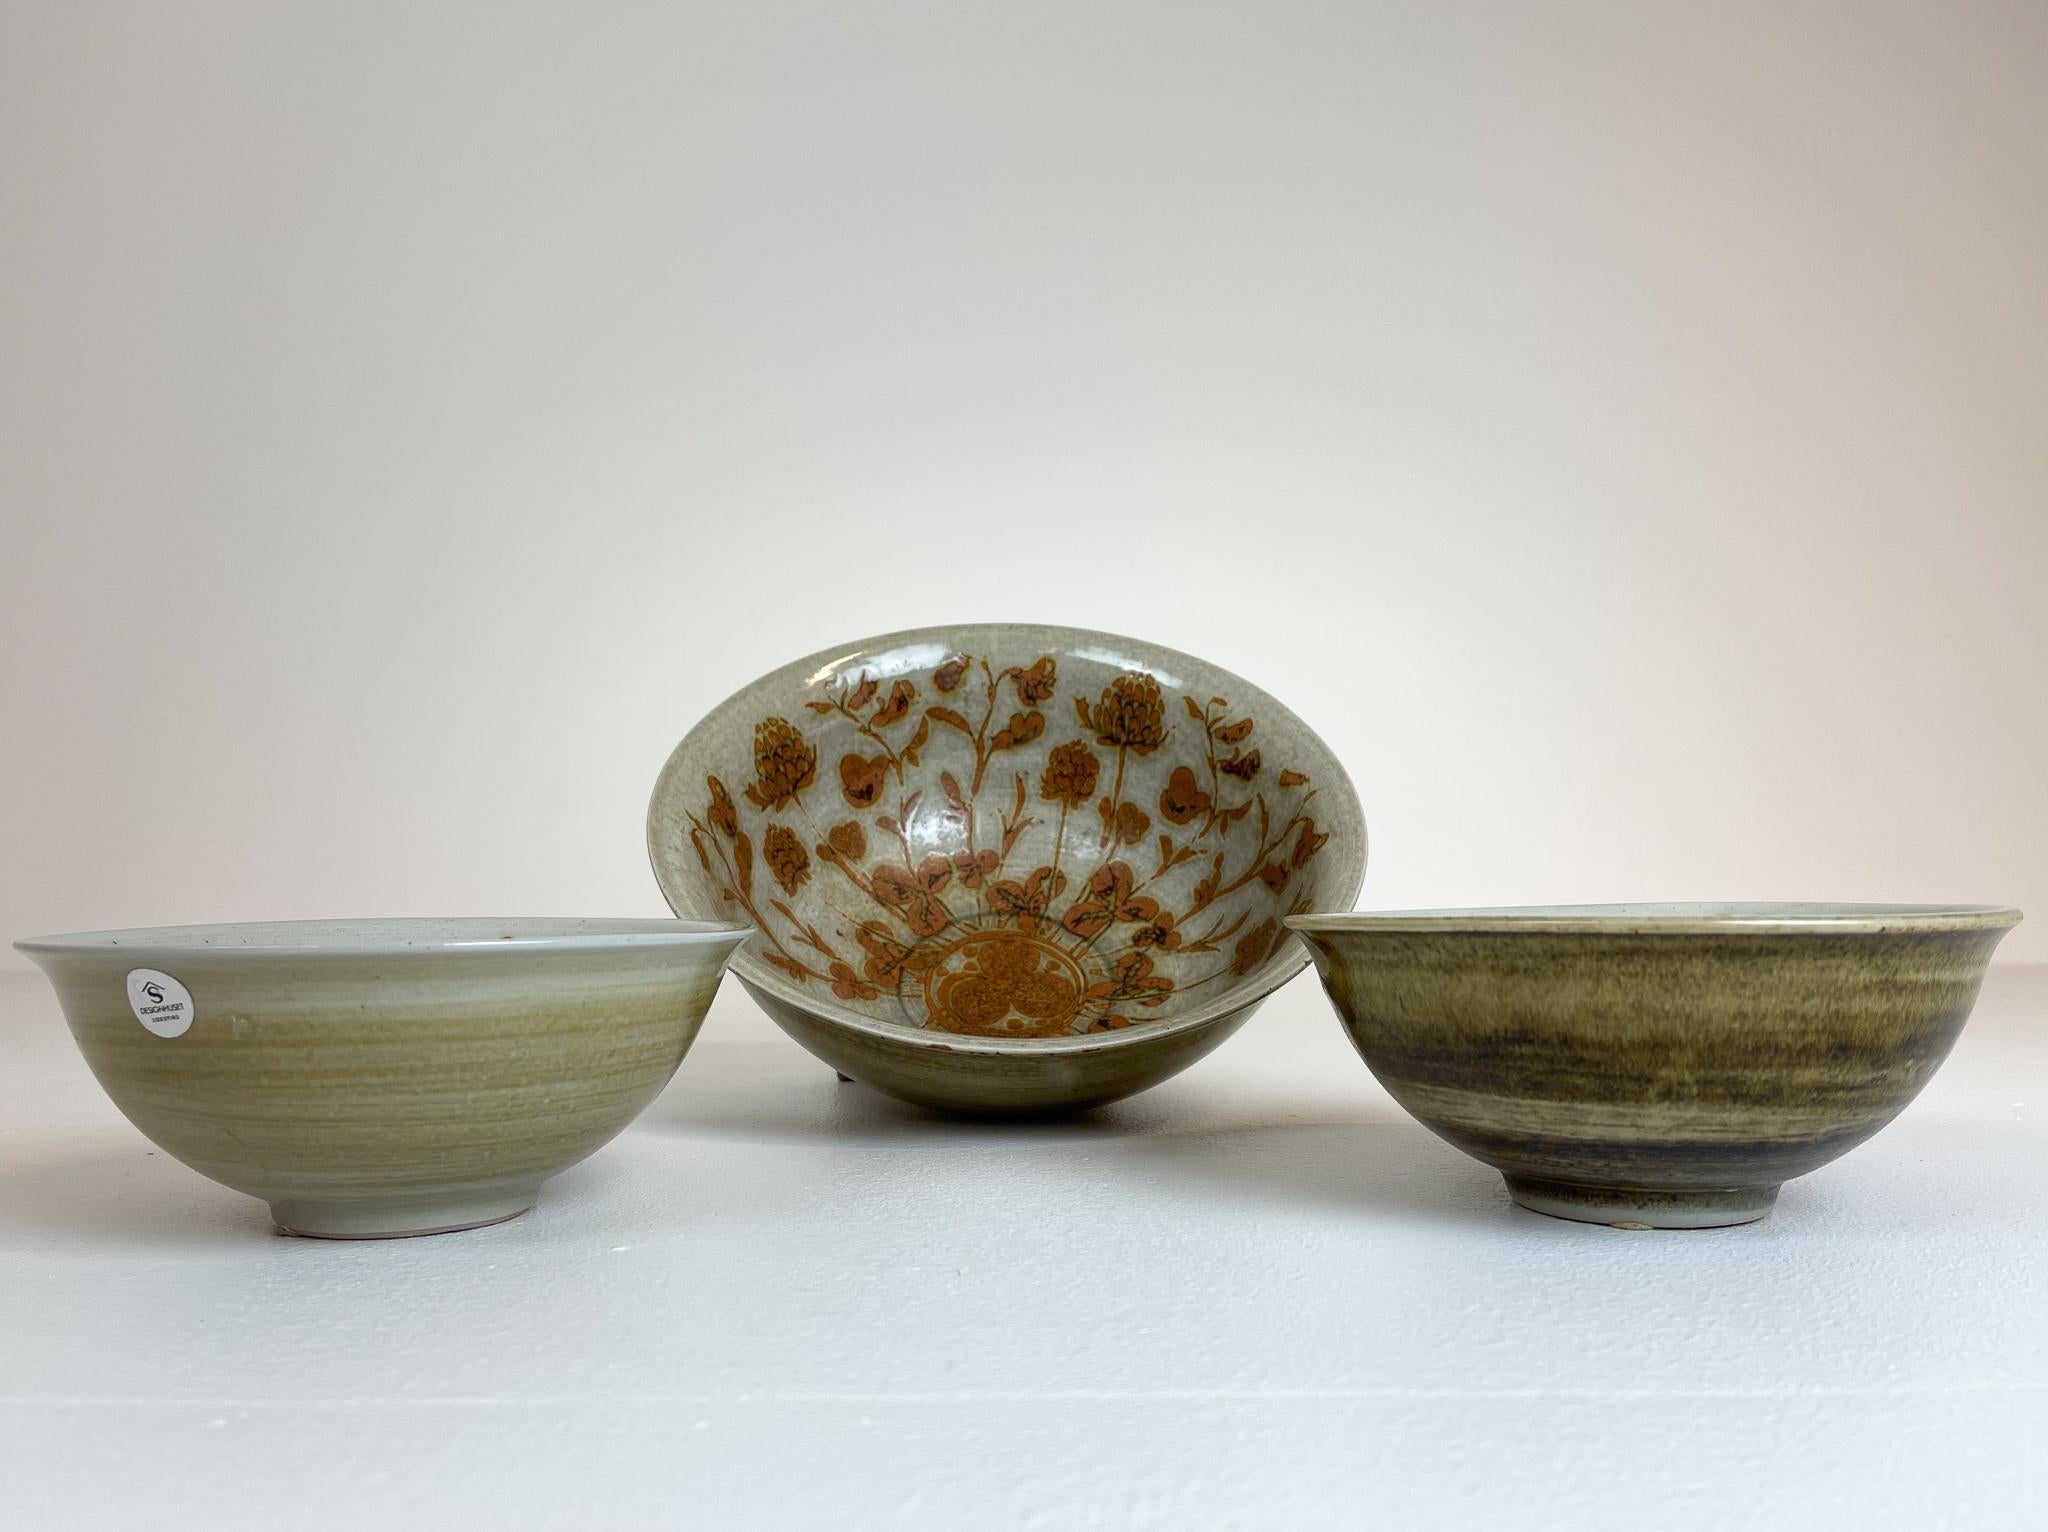 These three pieces of ceramics was made in Sweden 1980s for Design Huset and designed by one of the great ceramic’s designers from Sweden, Carl-Harry Stålhane. Wonderful, crafted bowls with that grace of Swedish midcentury pottery. Nicely shifting